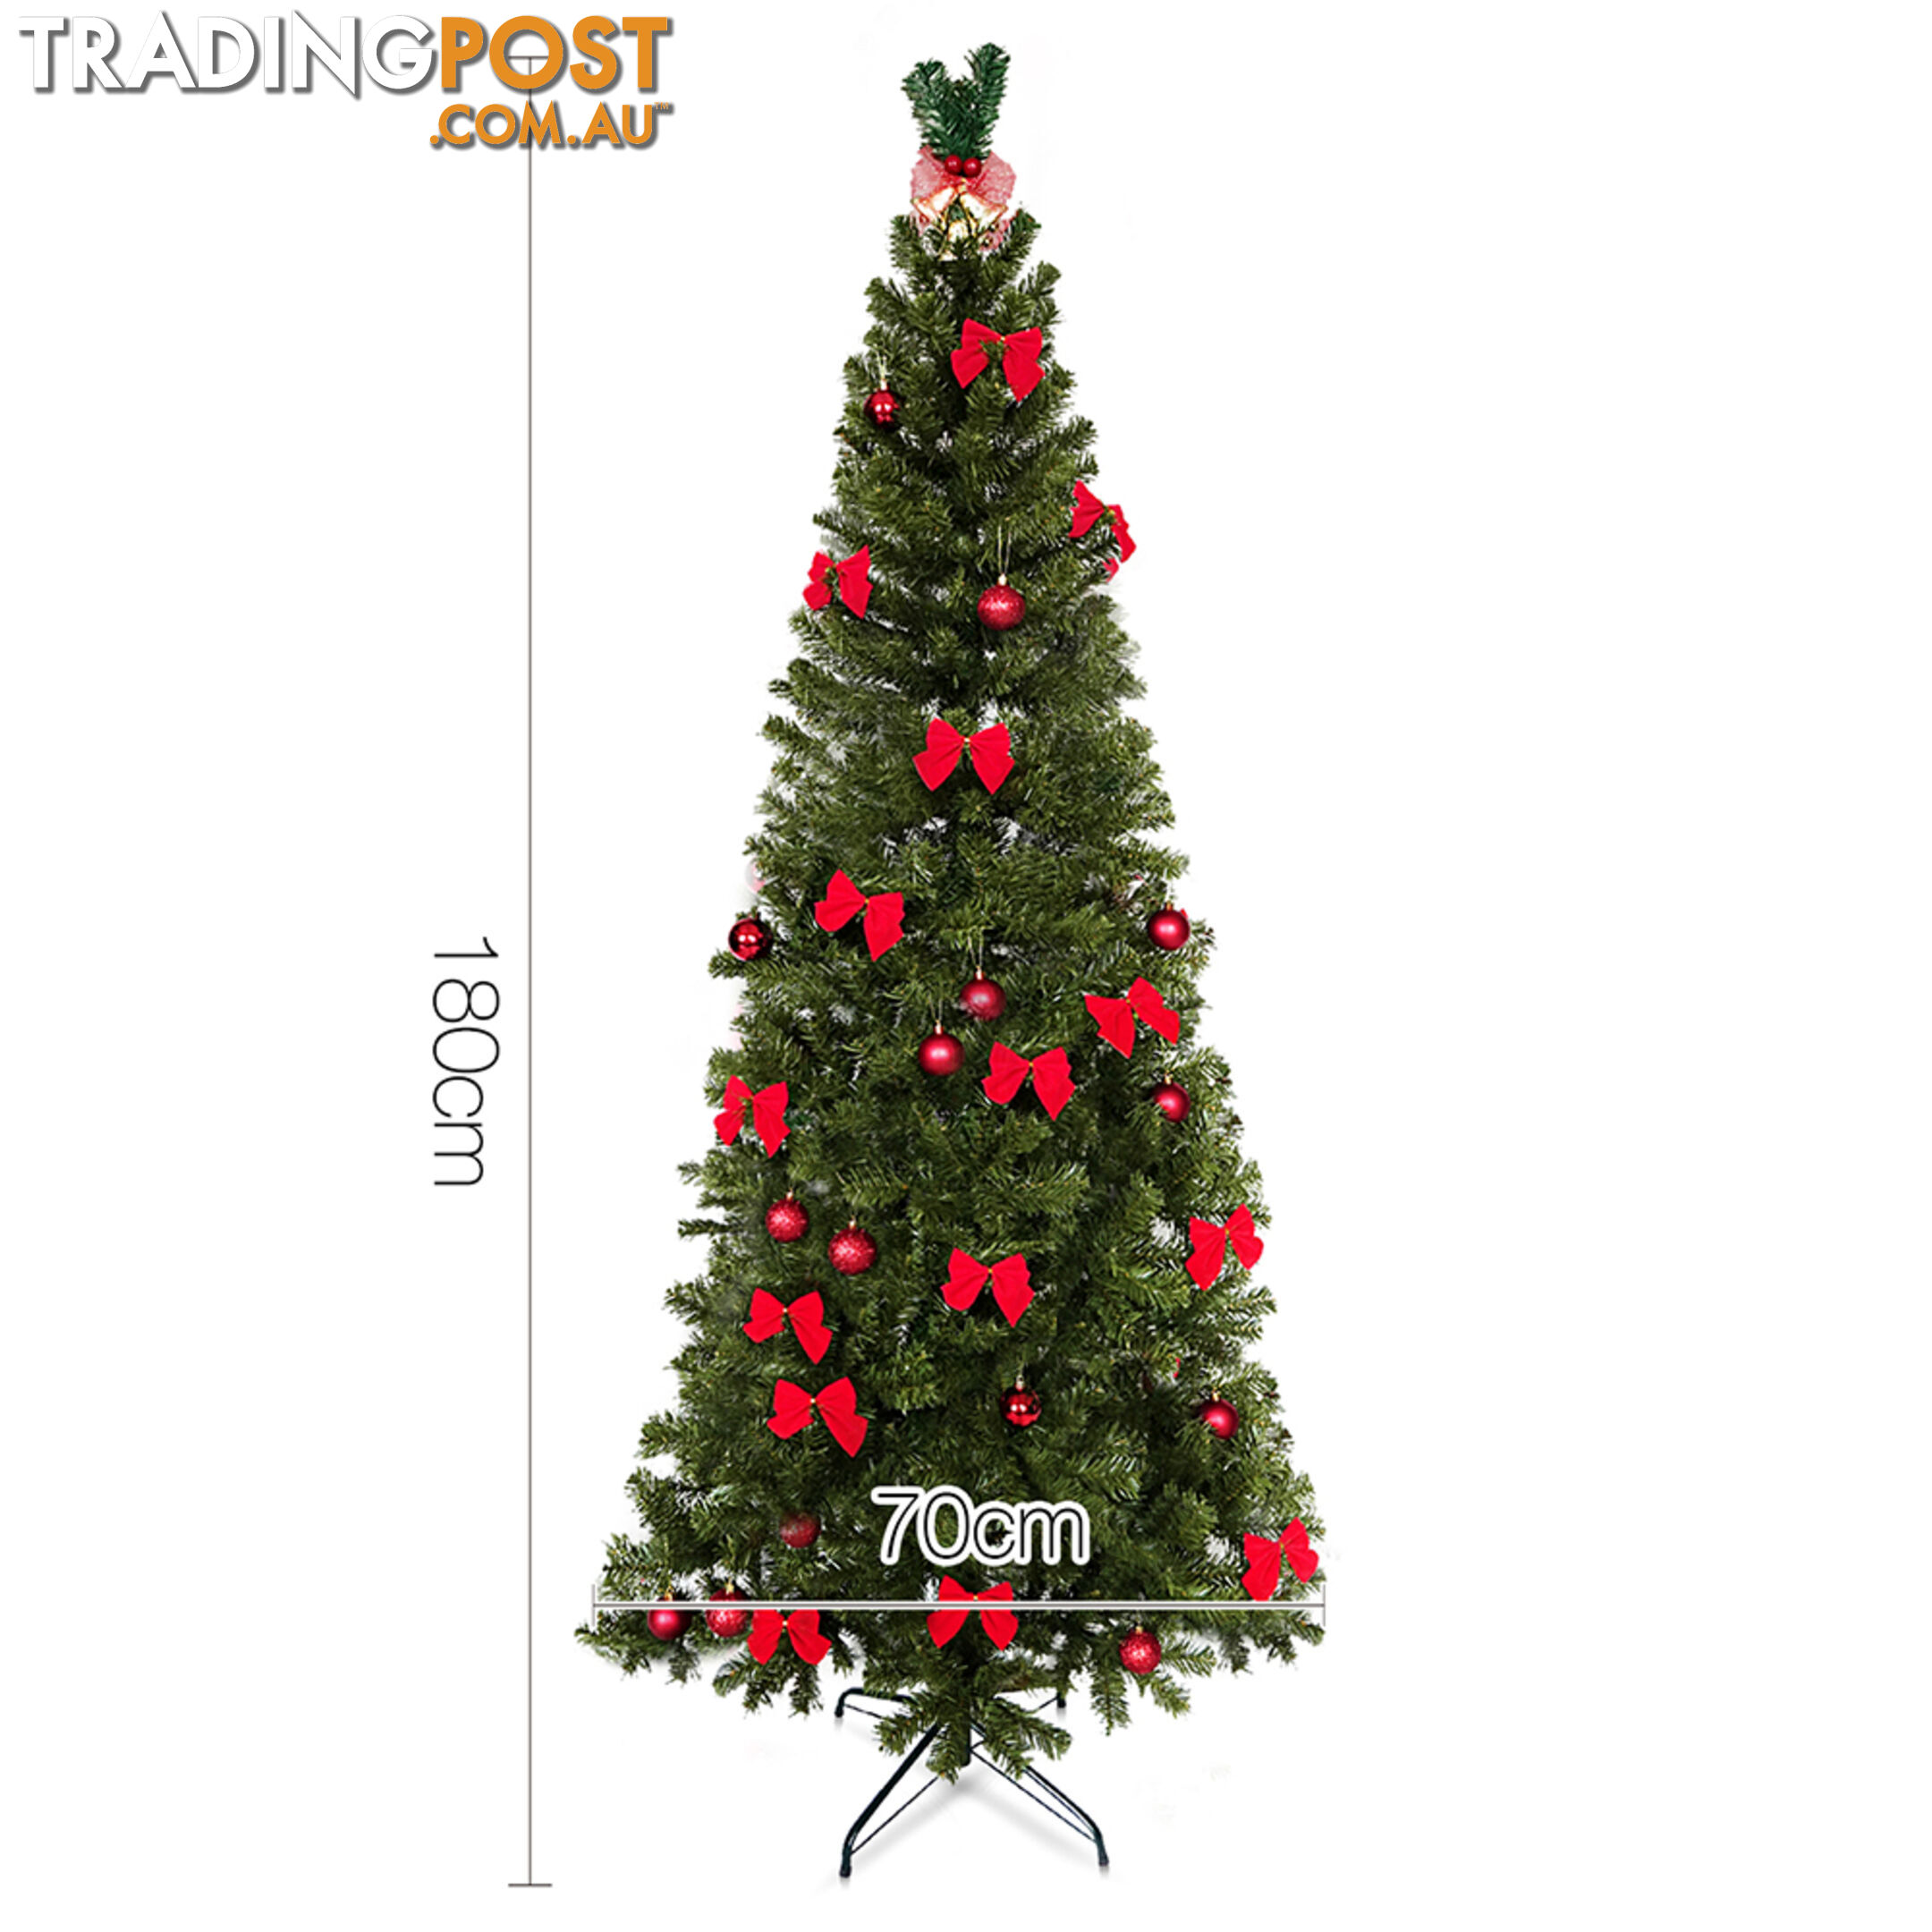 1.8M Christmas Tree with Ornaments - Green